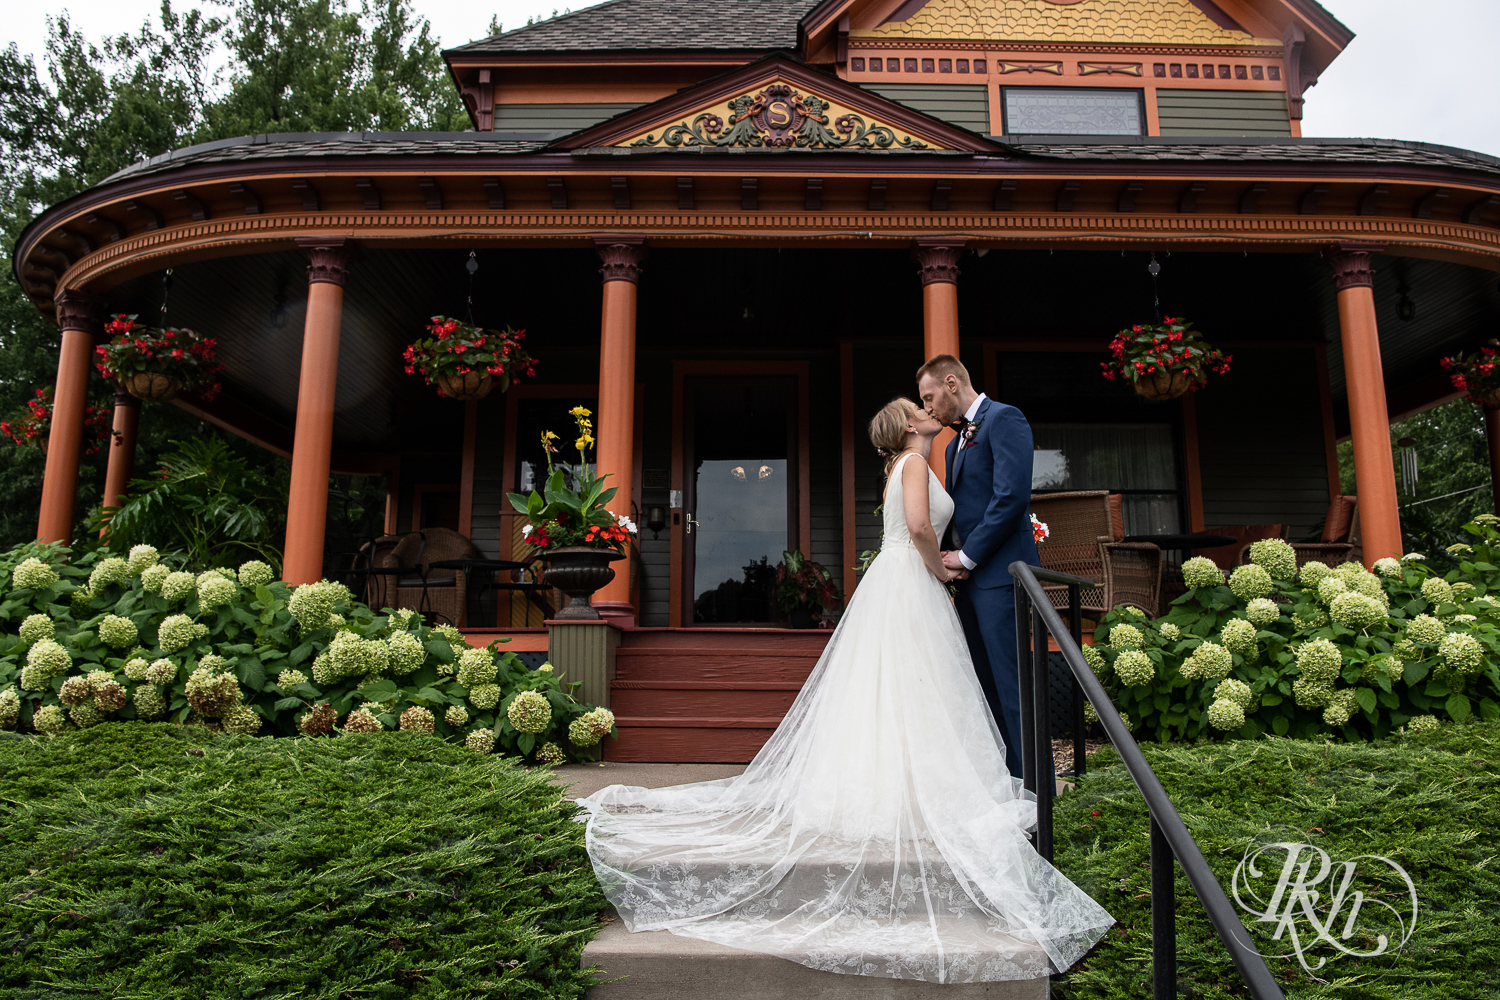 Bride and groom smile at the William Sauntry Mansion in Stillwater, Minnesota.